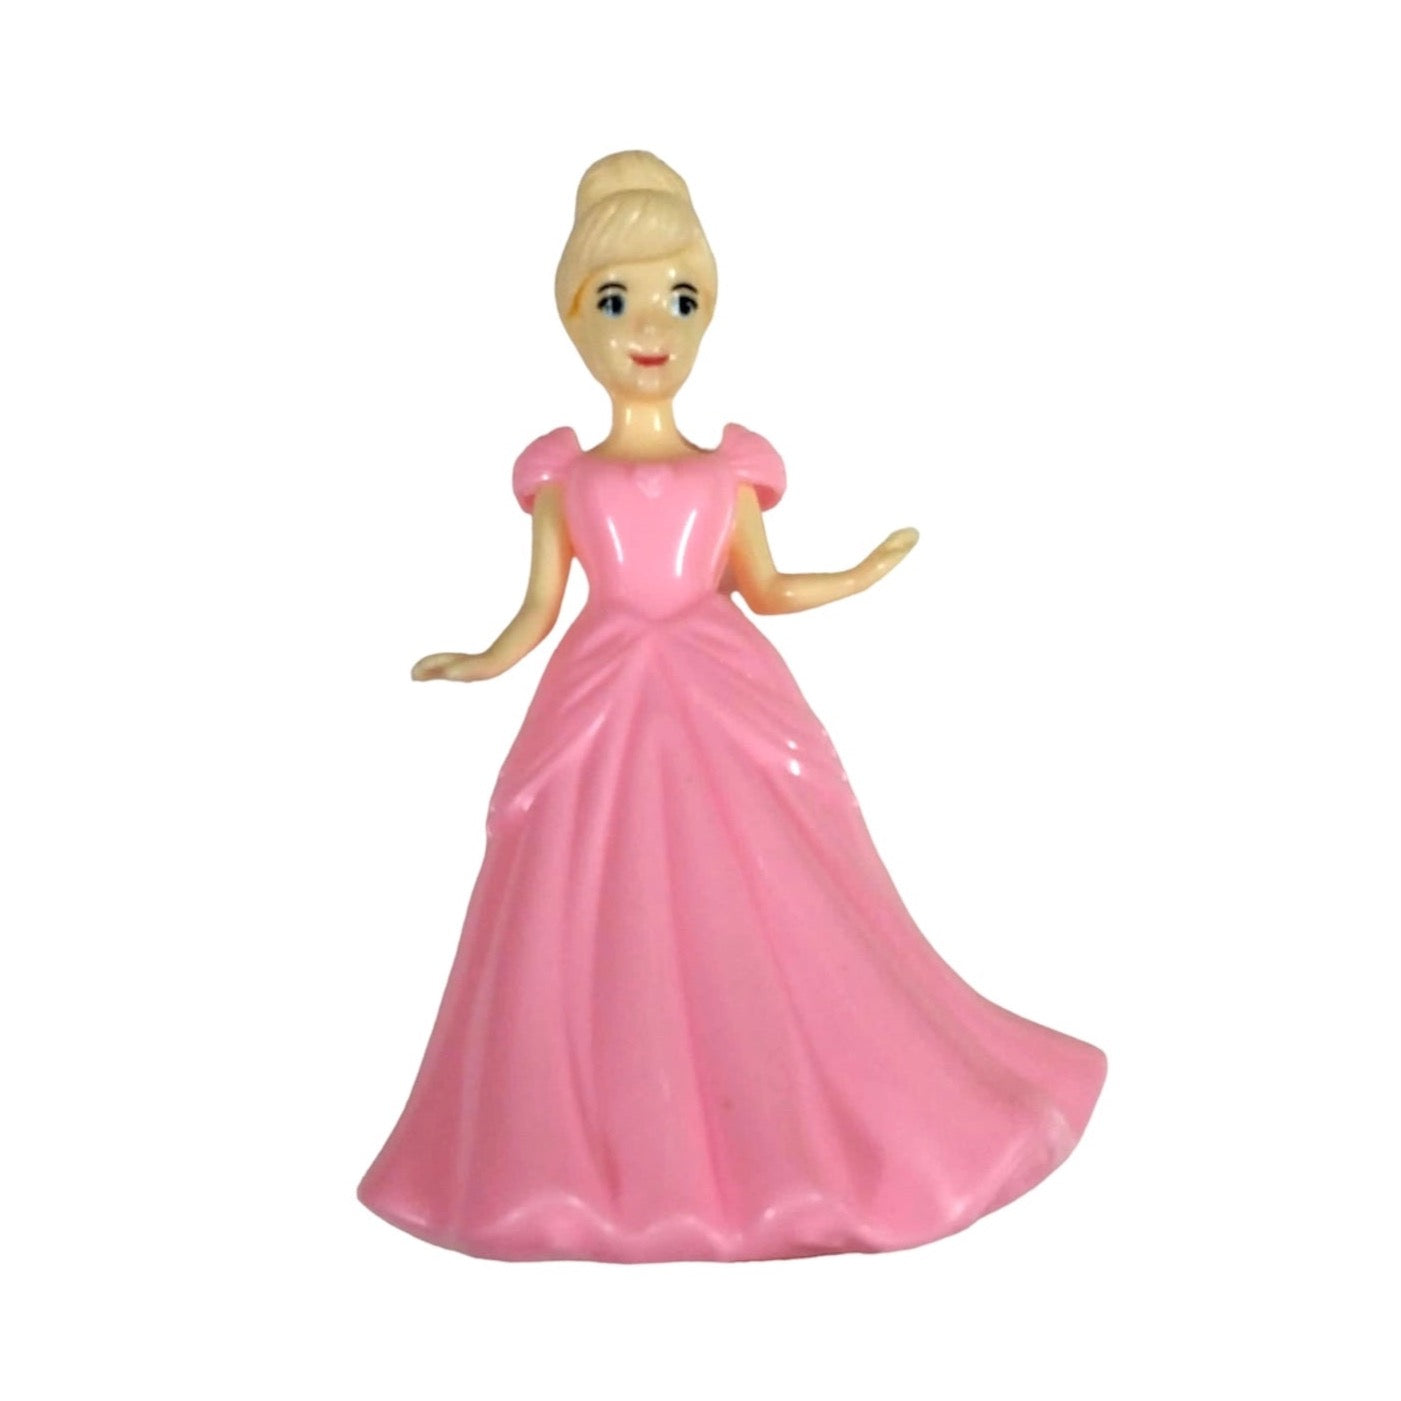 Bakewareind Cinderella Doll Toy Topper For Cake Decorating ( chose colors)